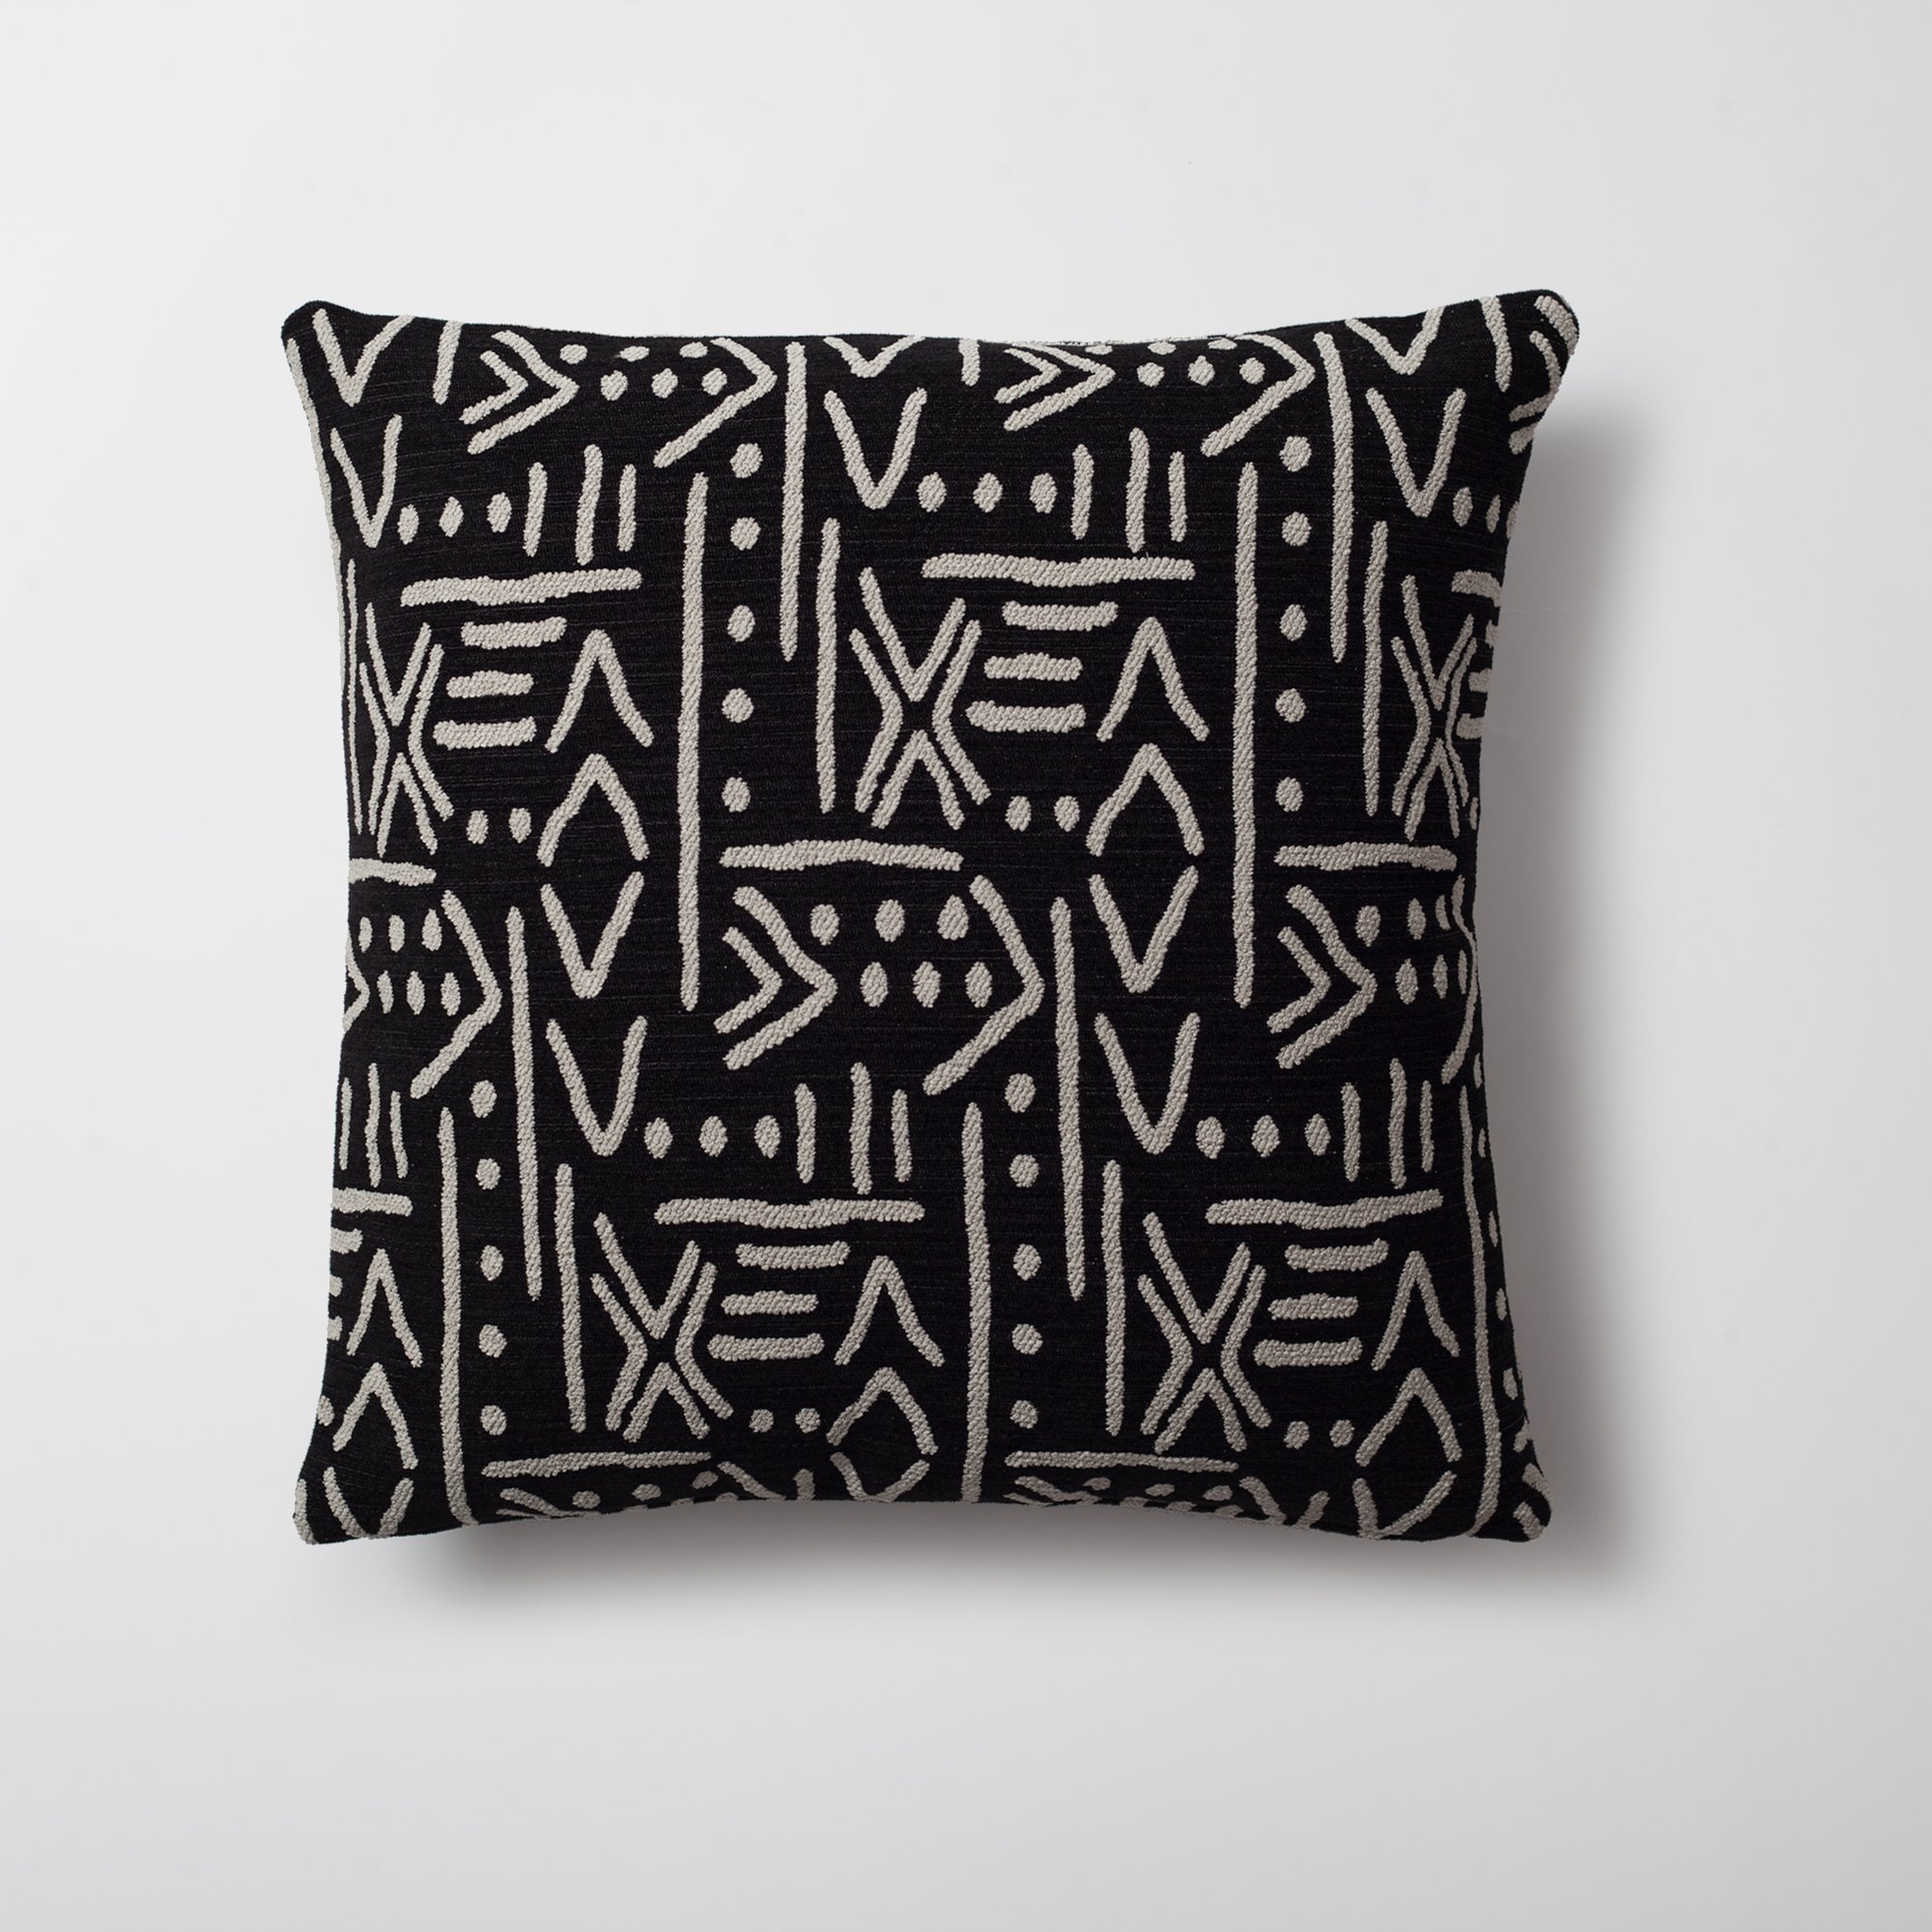 "Icon" - African Patterned 18x18 Inch Linen Pillow - Black (Cover Only)